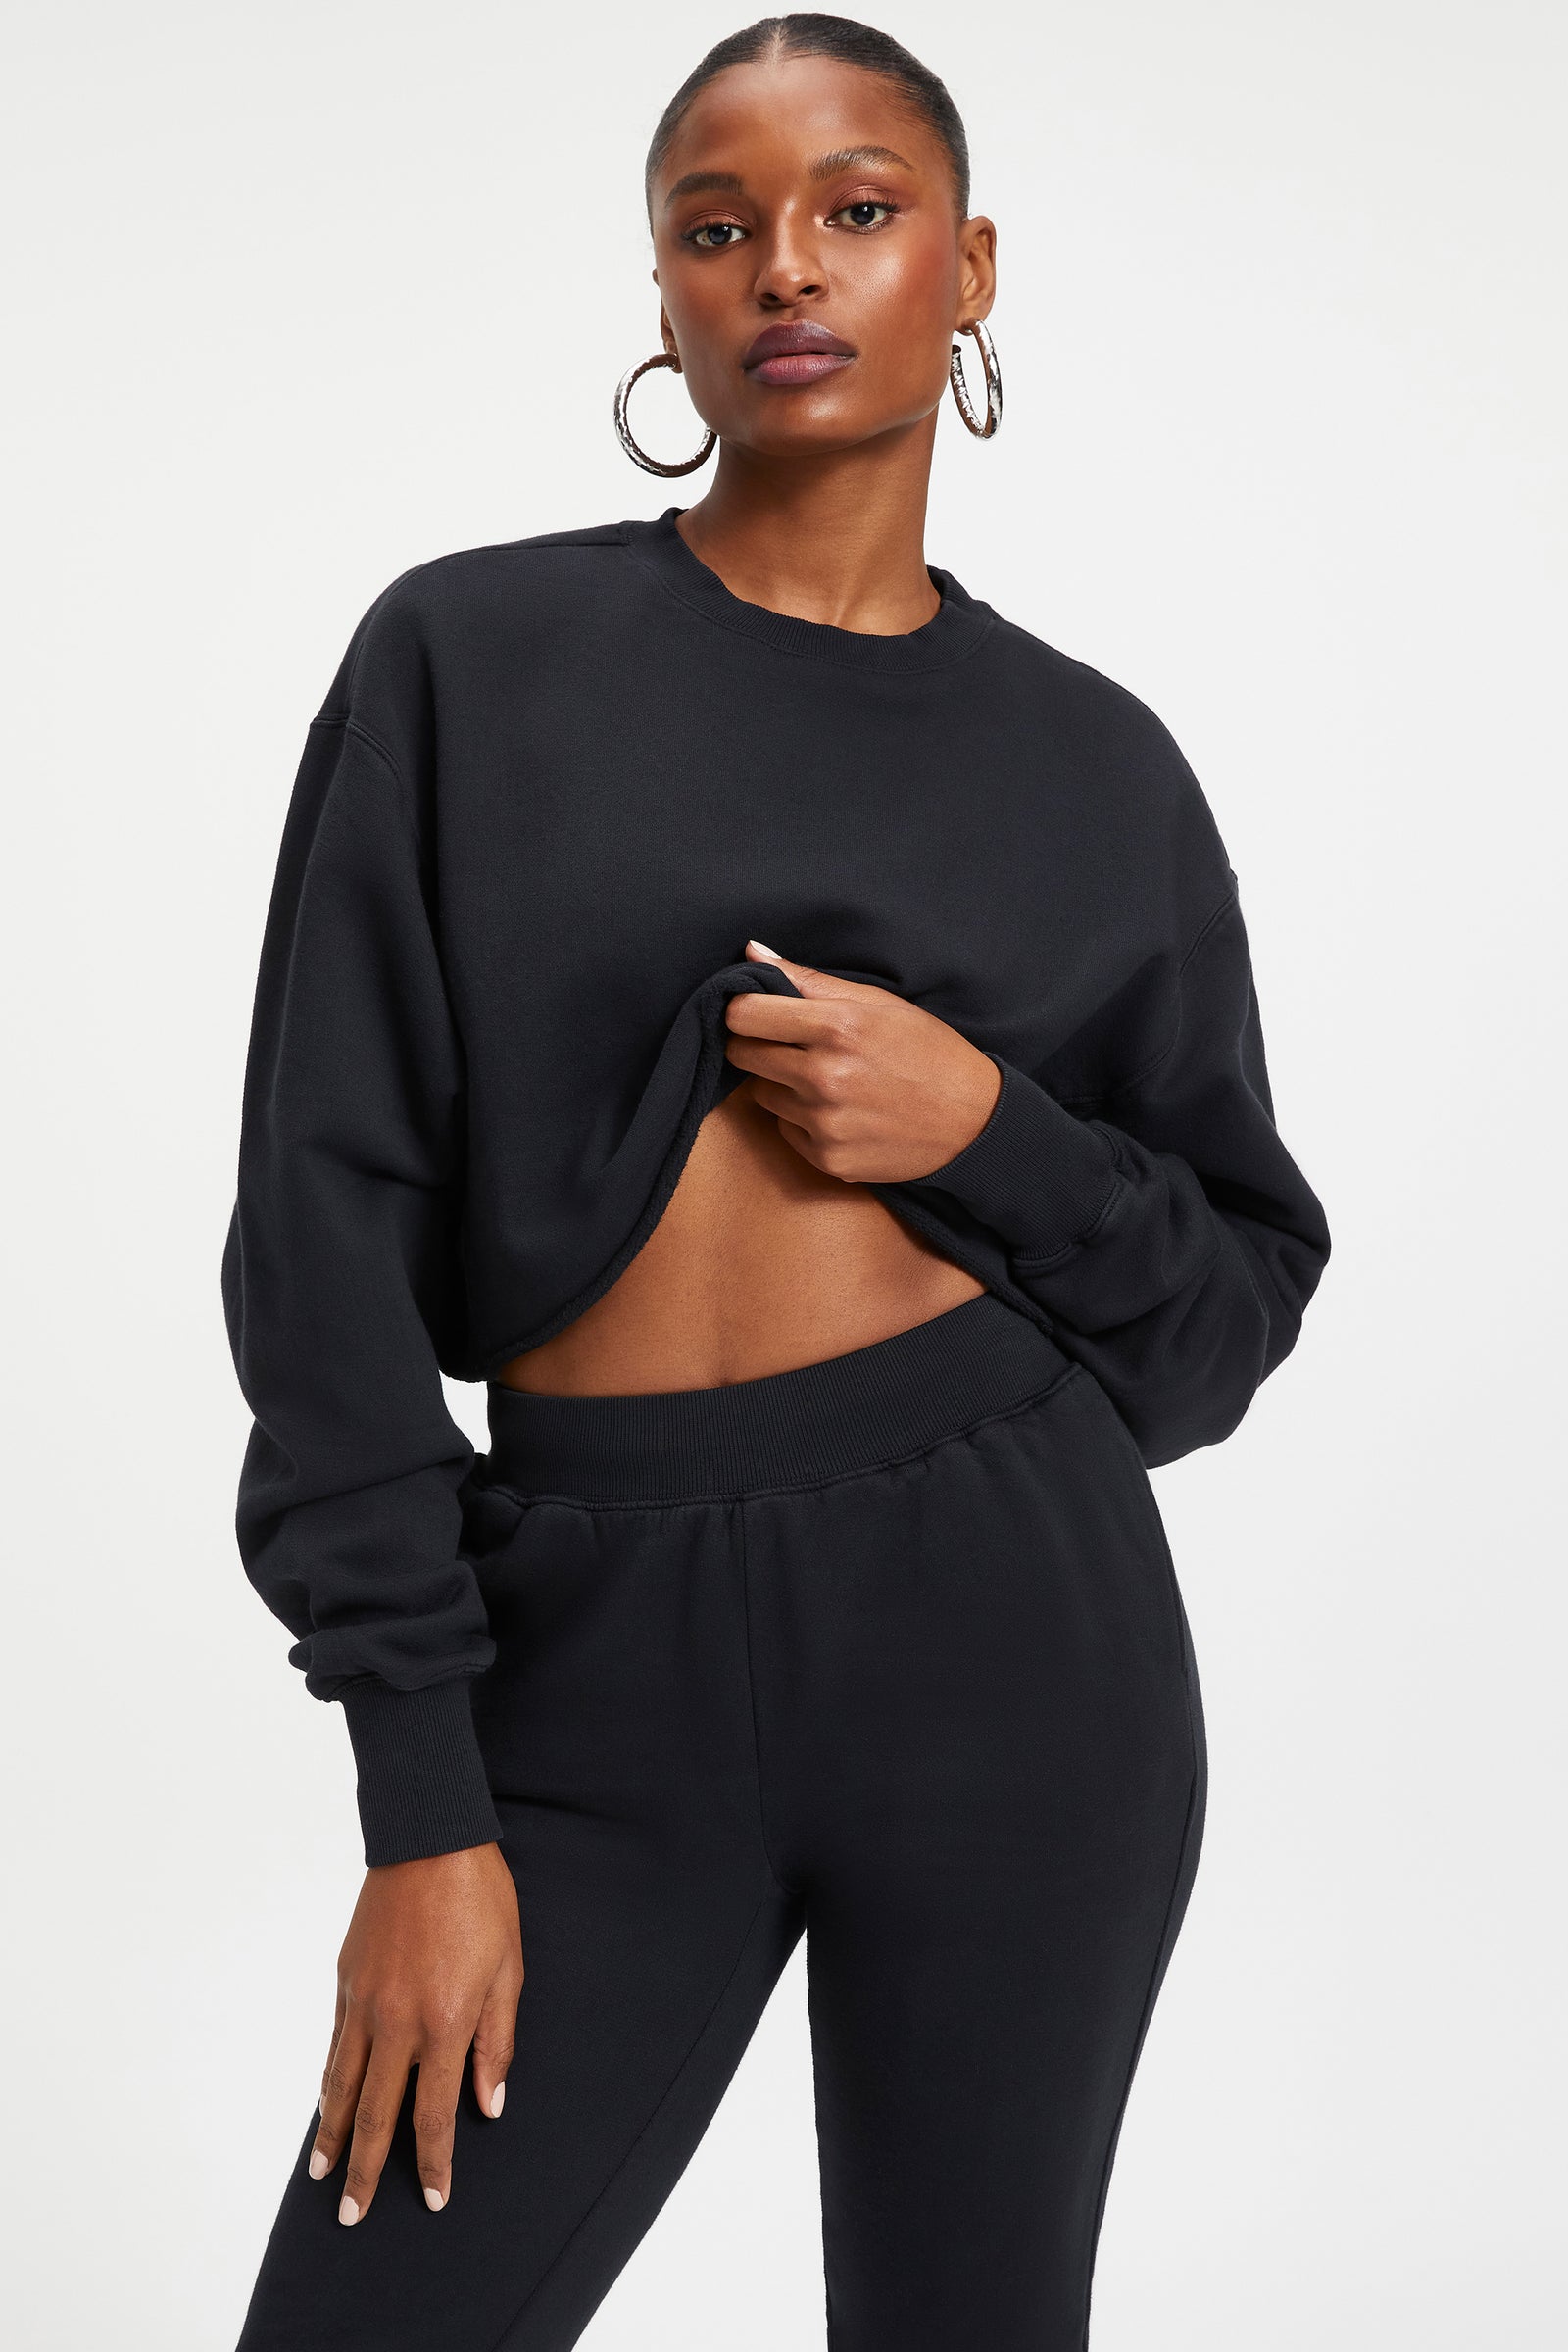 Get cozy in these stylish sweat sets for every occasion - Good